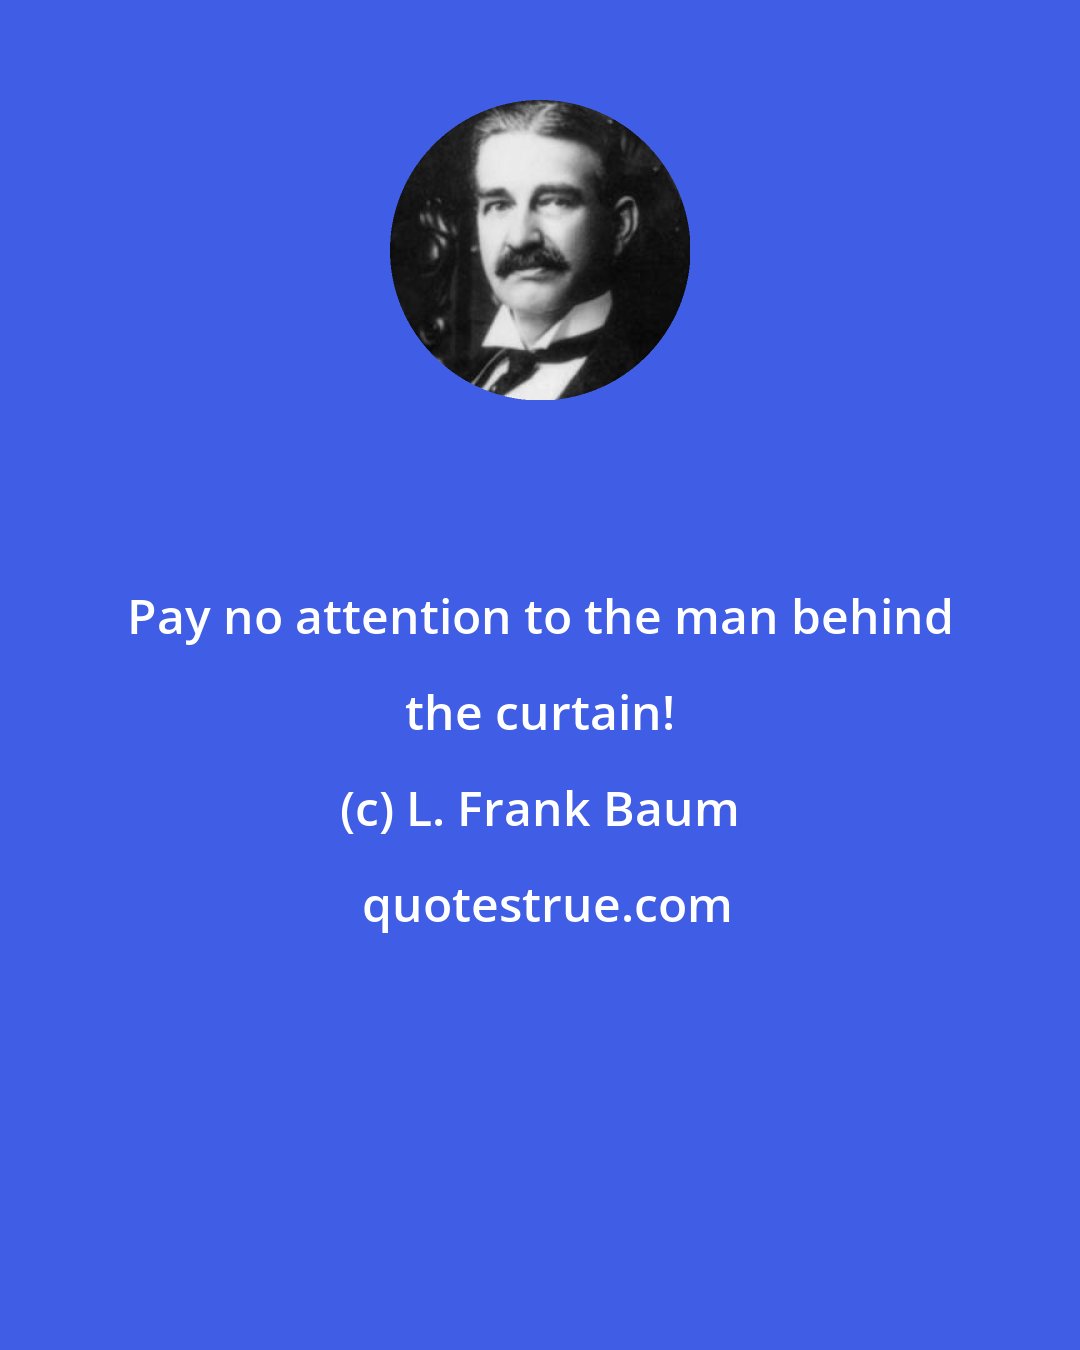 L. Frank Baum: Pay no attention to the man behind the curtain!